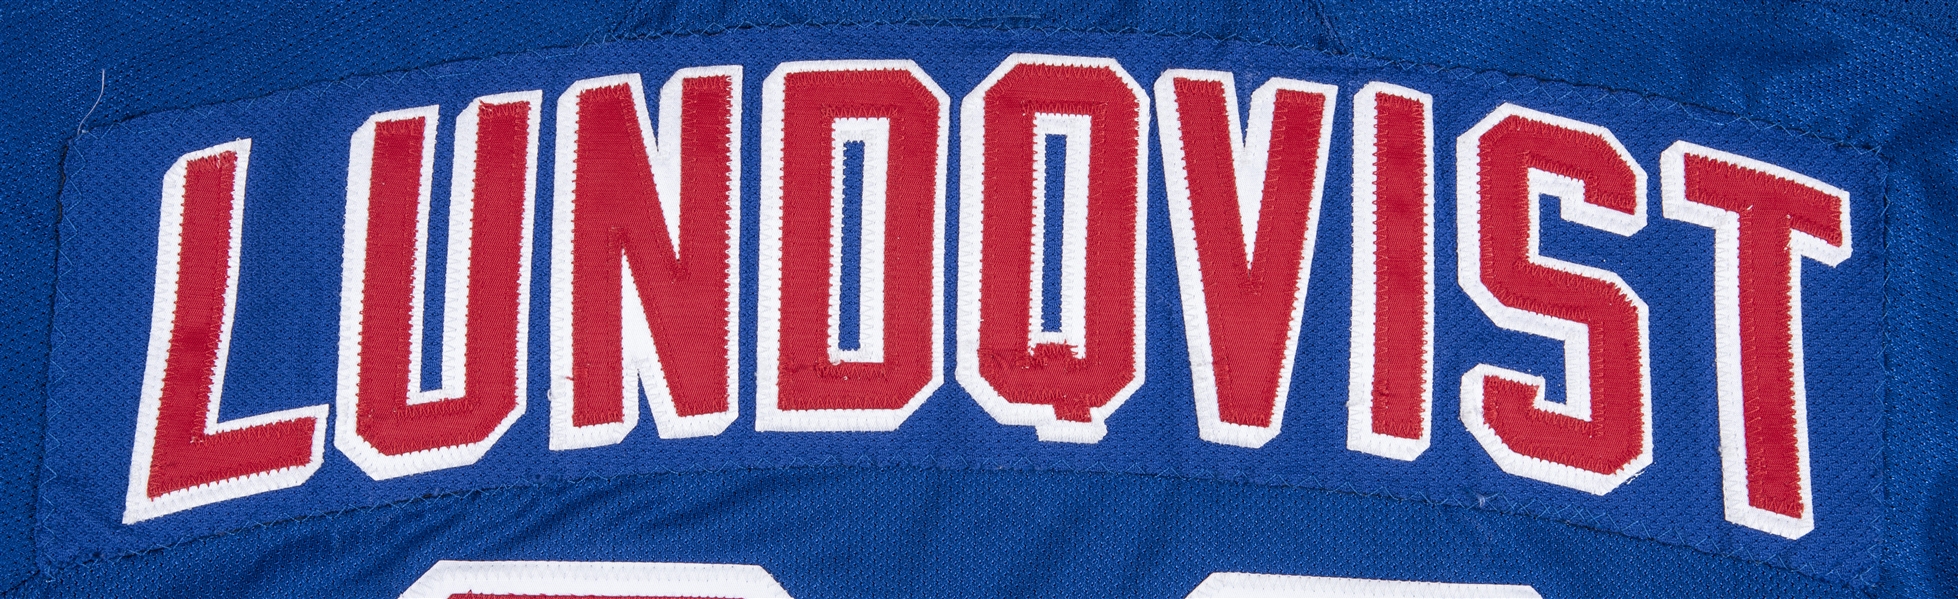 New York Rangers #30 Henrik Lundqvist Black Ice Jersey on sale,for  Cheap,wholesale from China